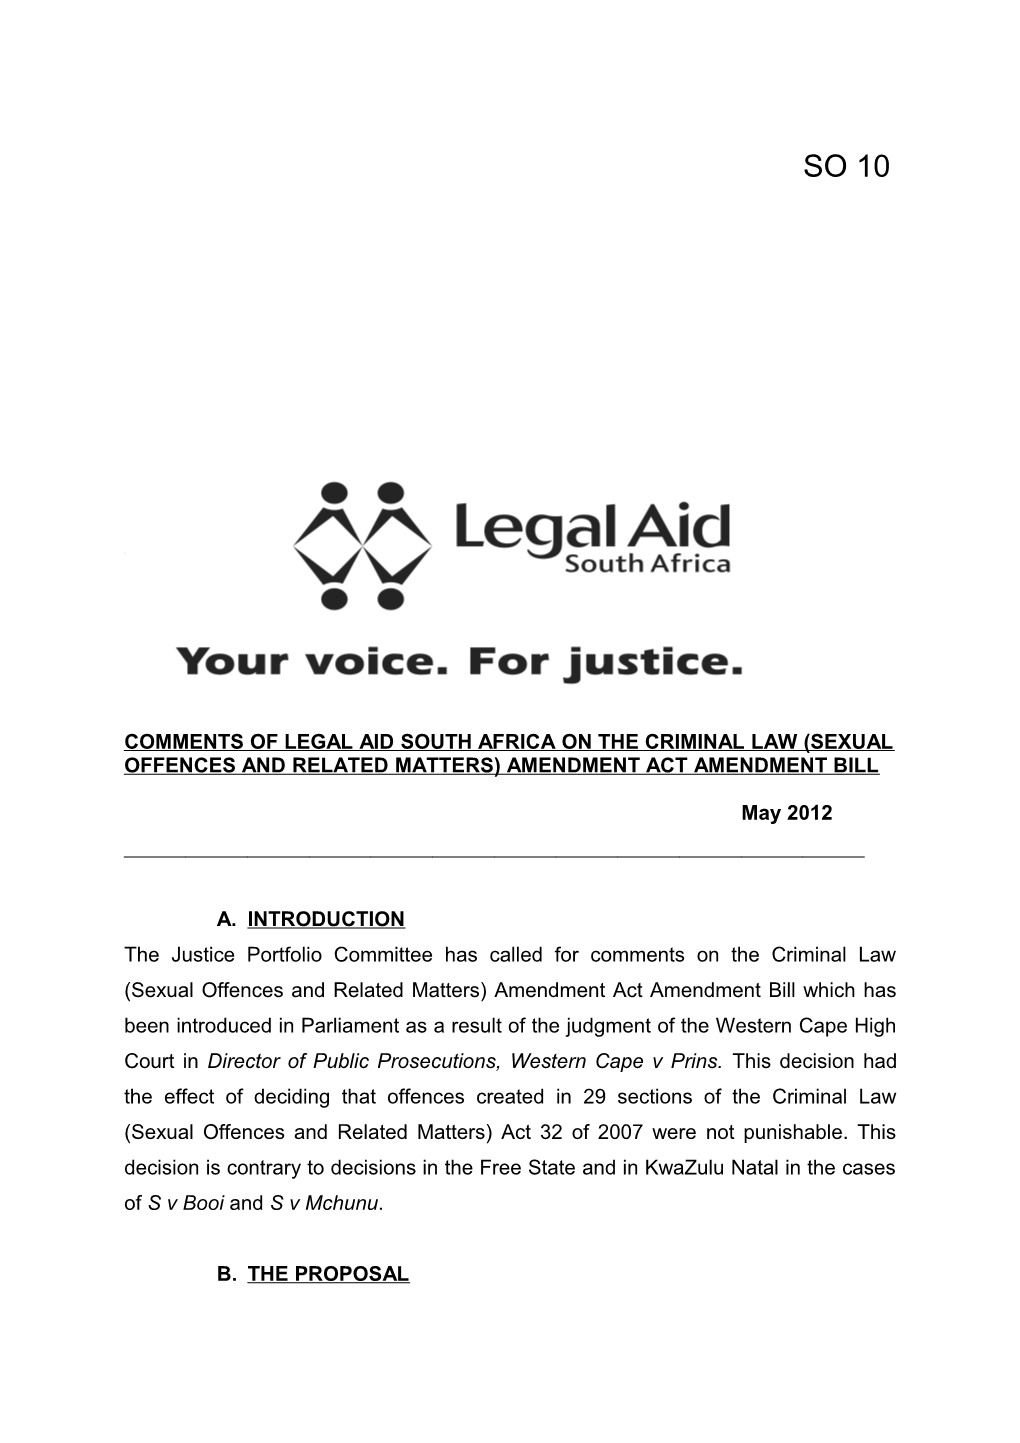 Comments of Legal Aid South Africa on the Criminal Law (Sexual Offences and Related Matters)